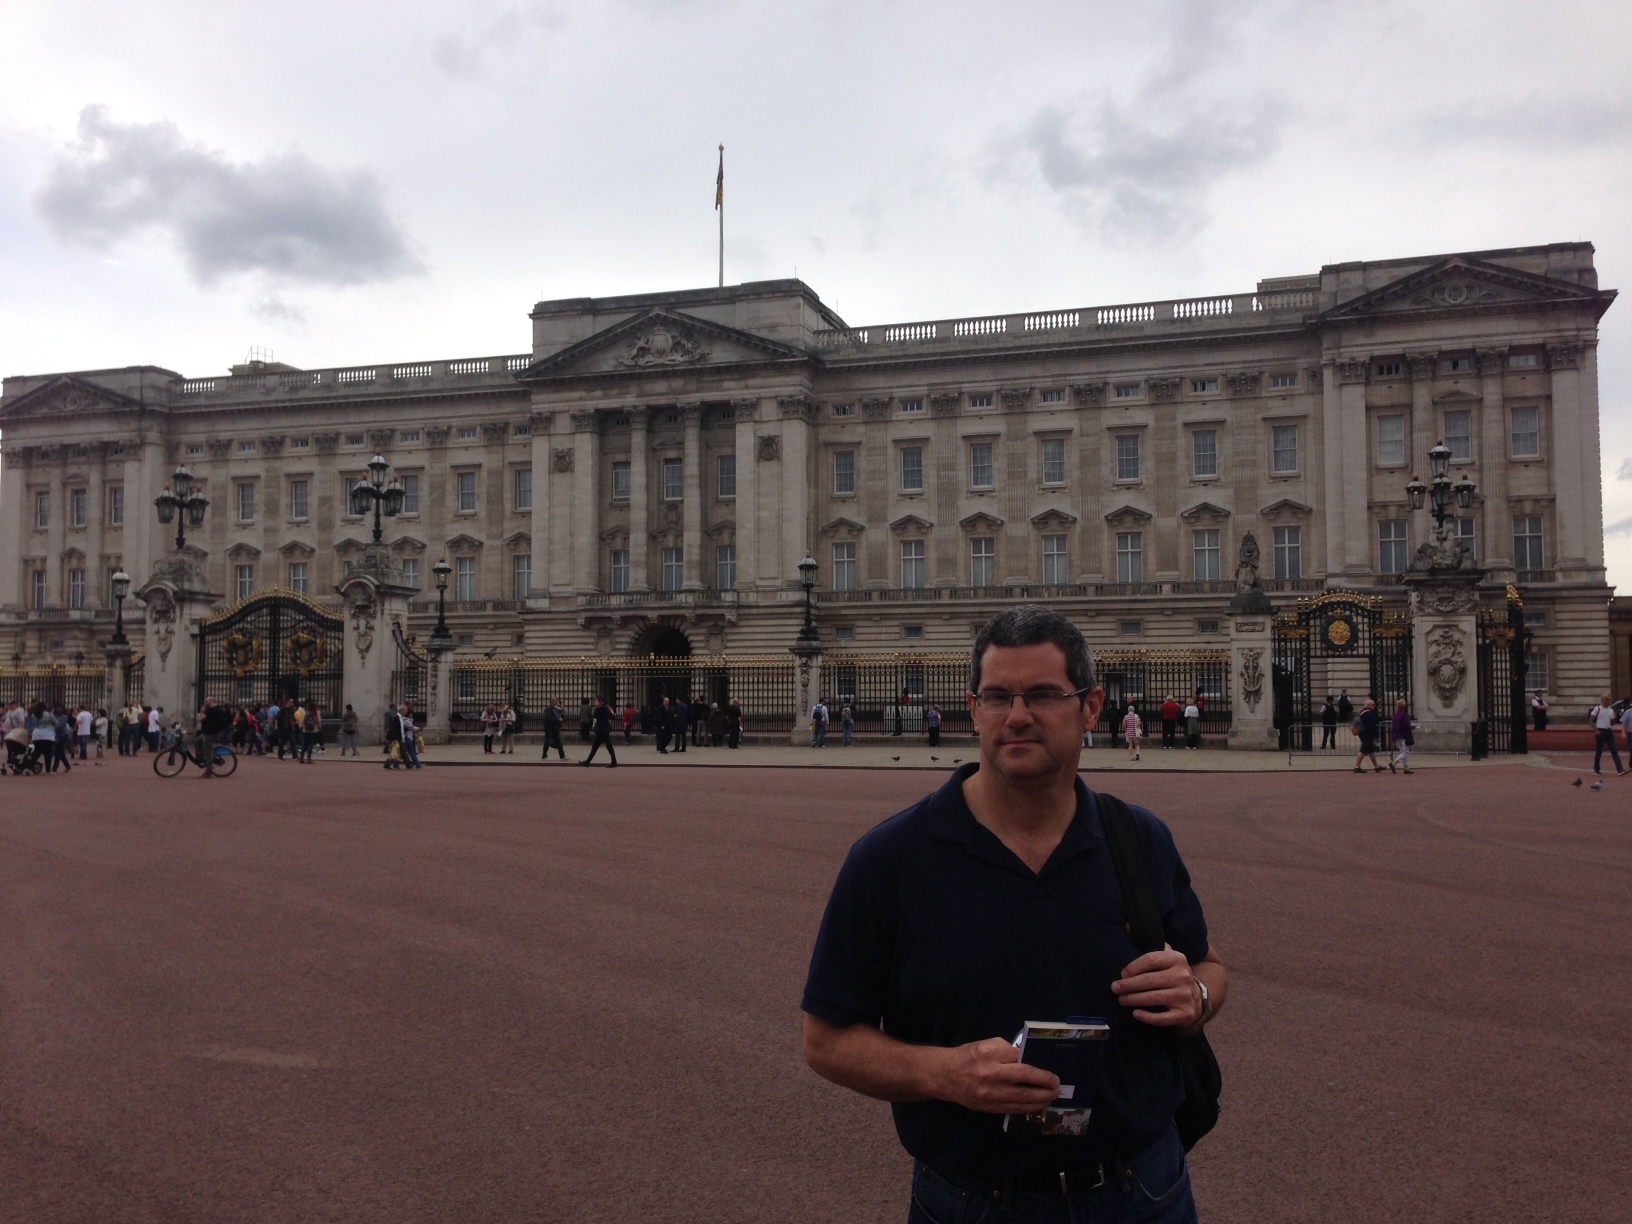 Buckingham Palace wasn't open for tourists when we were there in 2014, but I will get to go inside this time. 